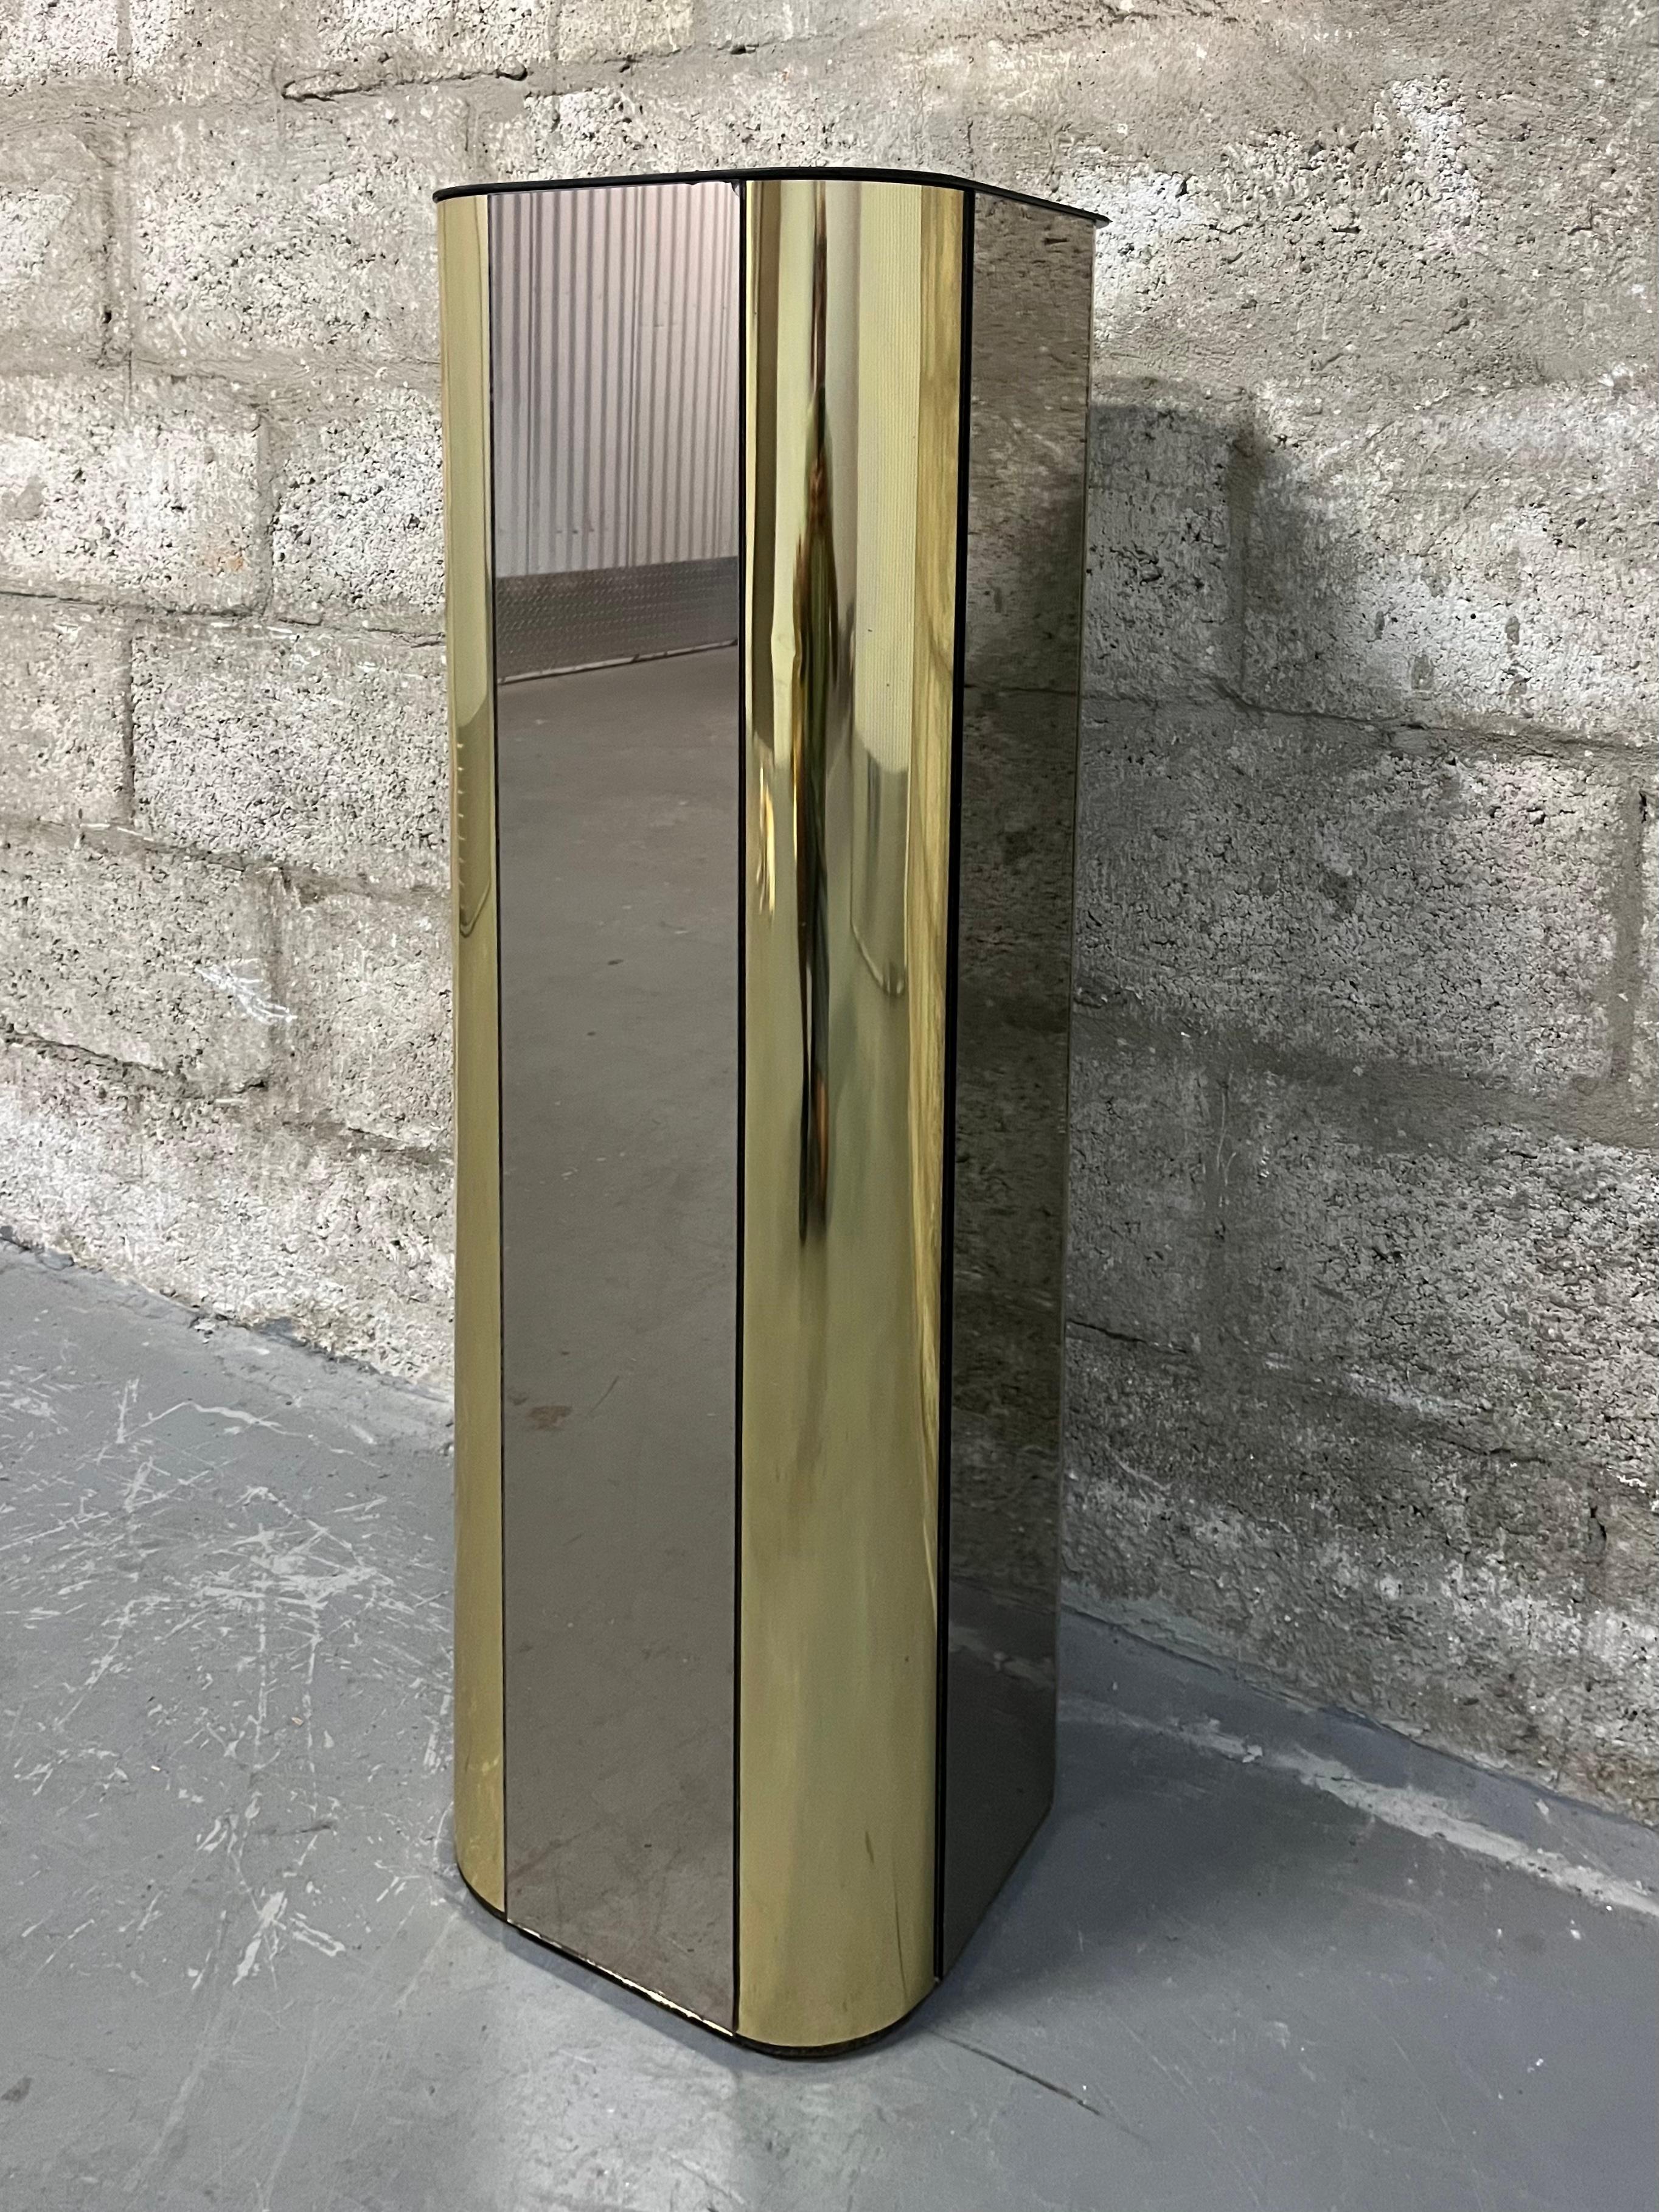 Plated Hollywood Regency Brass and Smoked Mirror Pedestal in the Curtis Jere's Style.